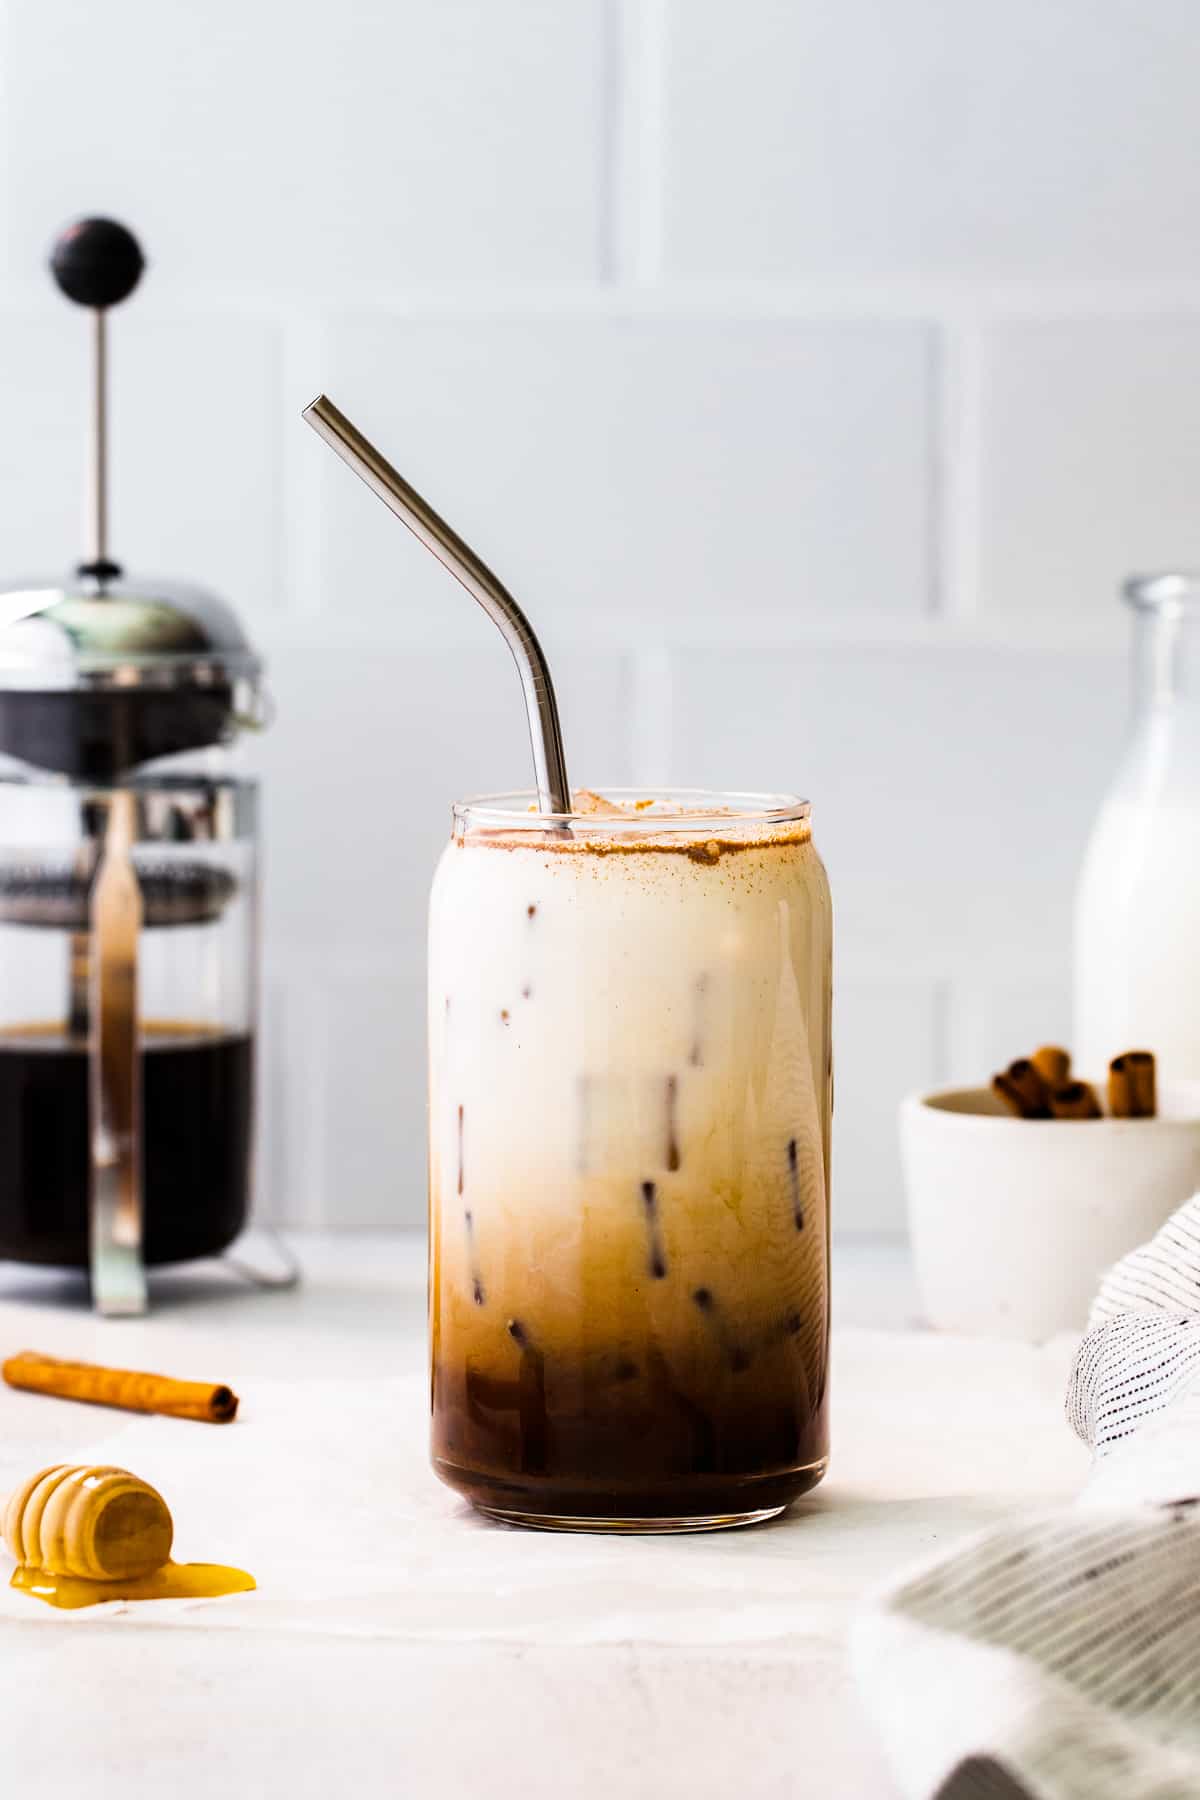 How to Make Iced Latte at Home (A Ridiculously Simple Recipe)